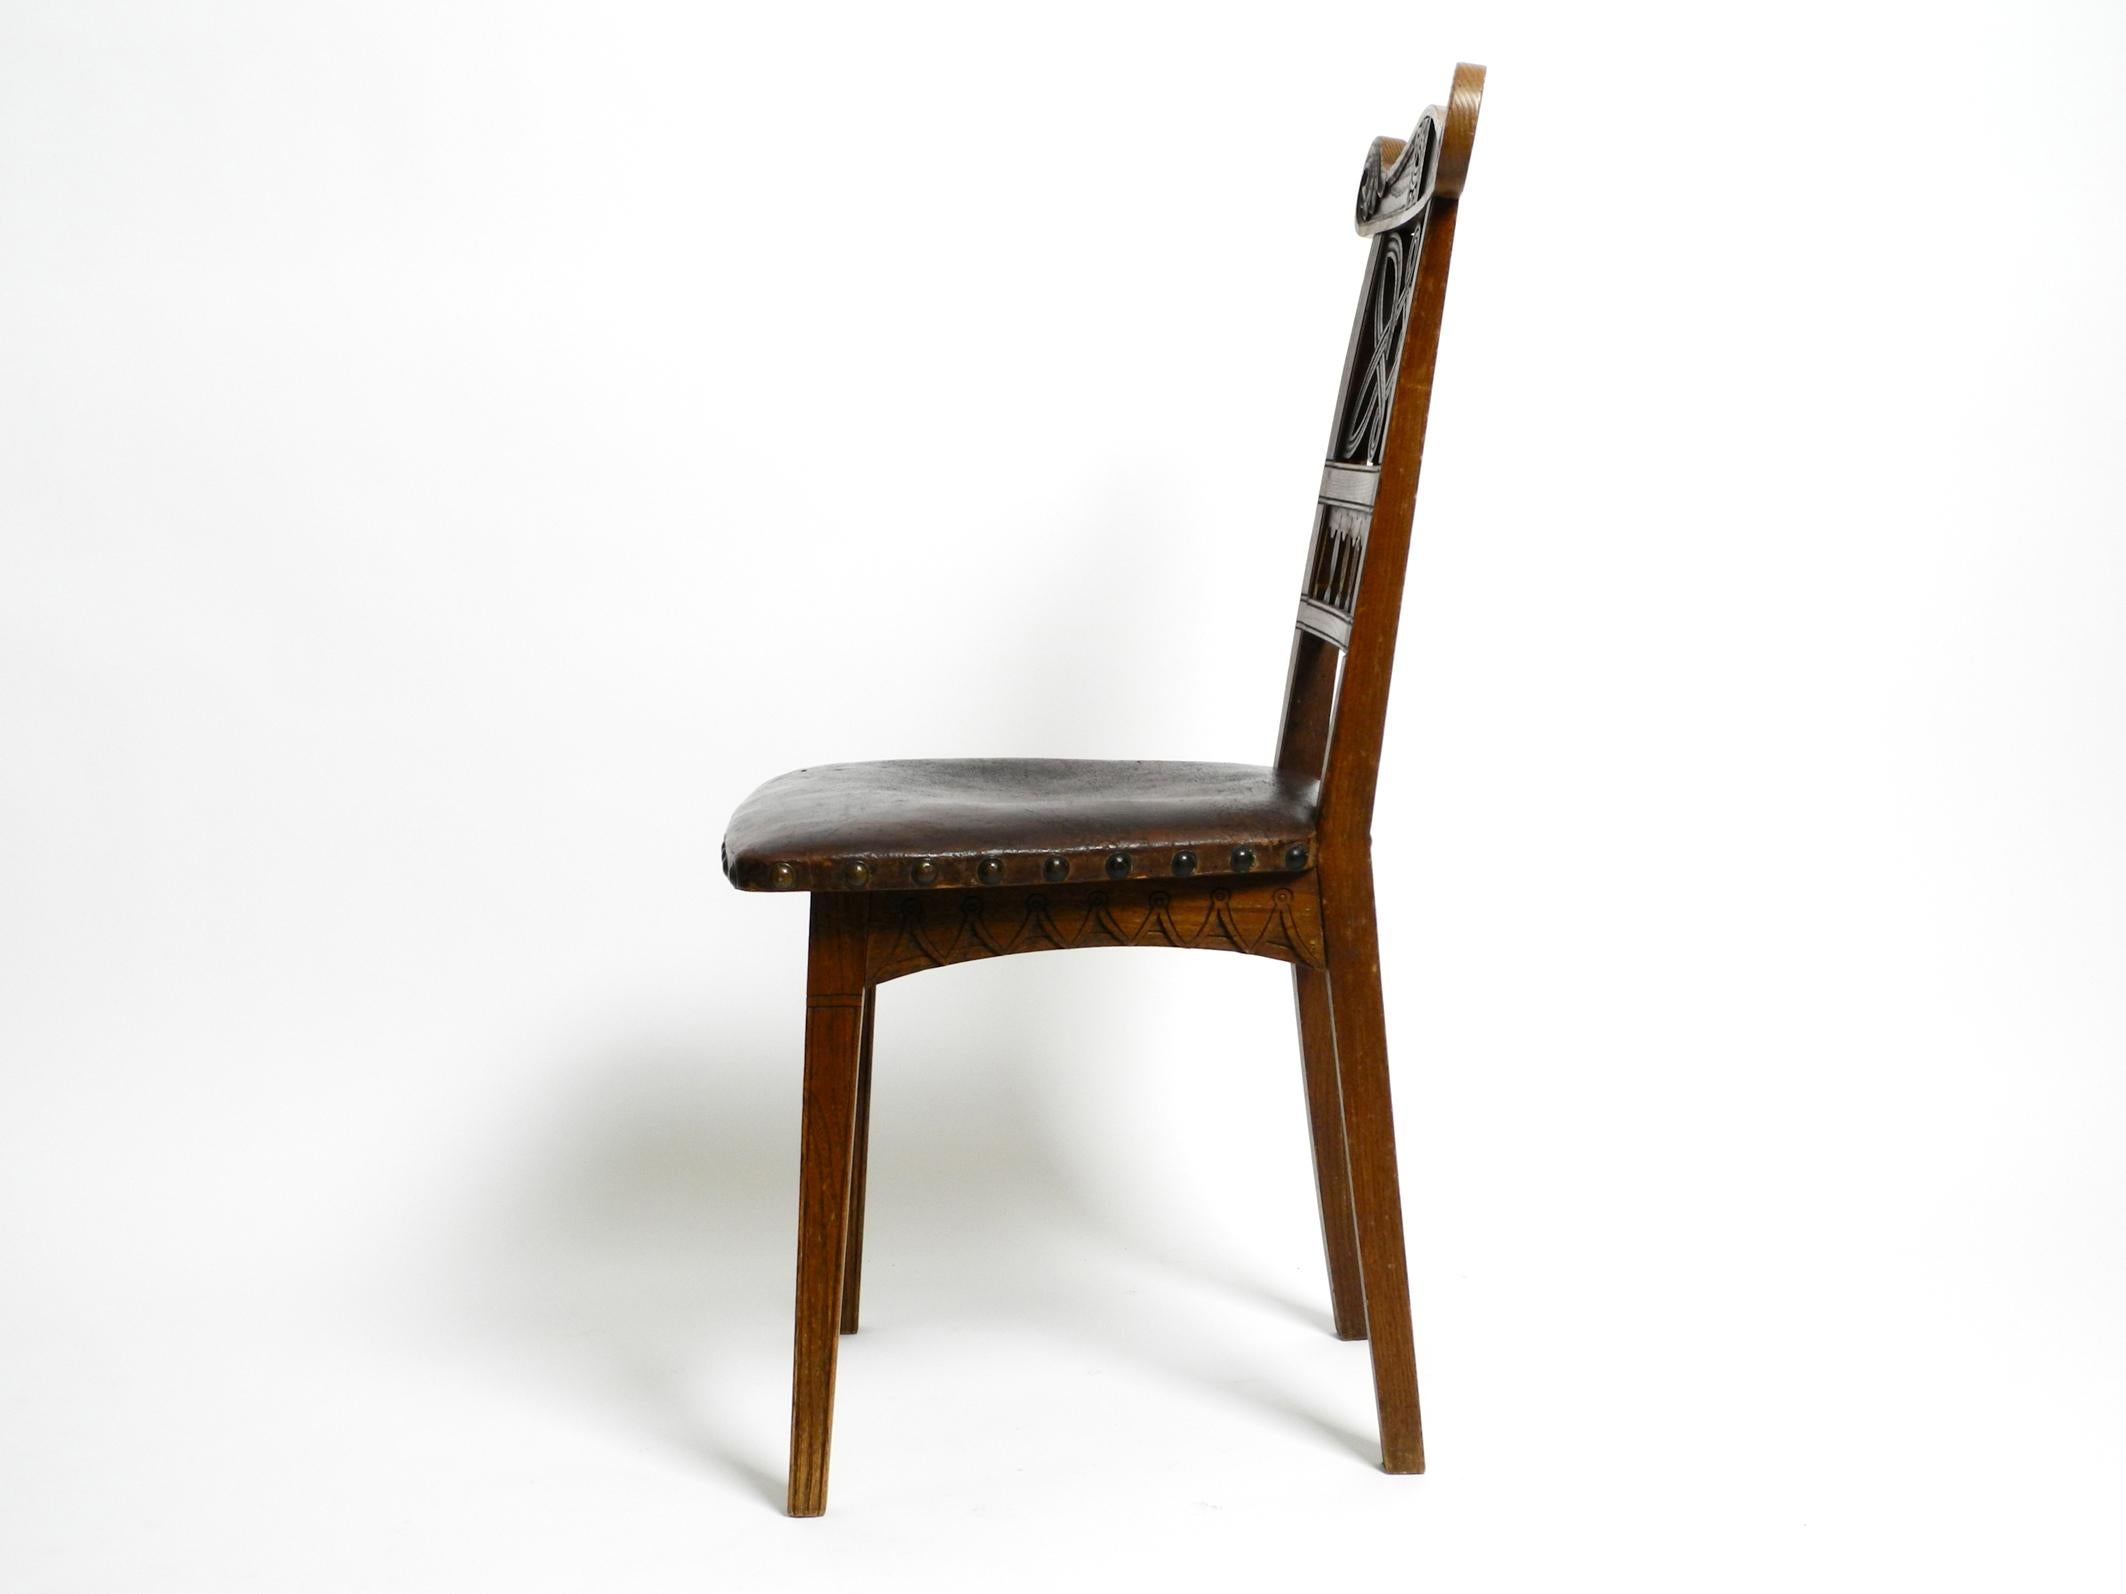 2 Art Nouveau Oak Chairs Still with the Original Leather Seats from Around 1900 For Sale 10